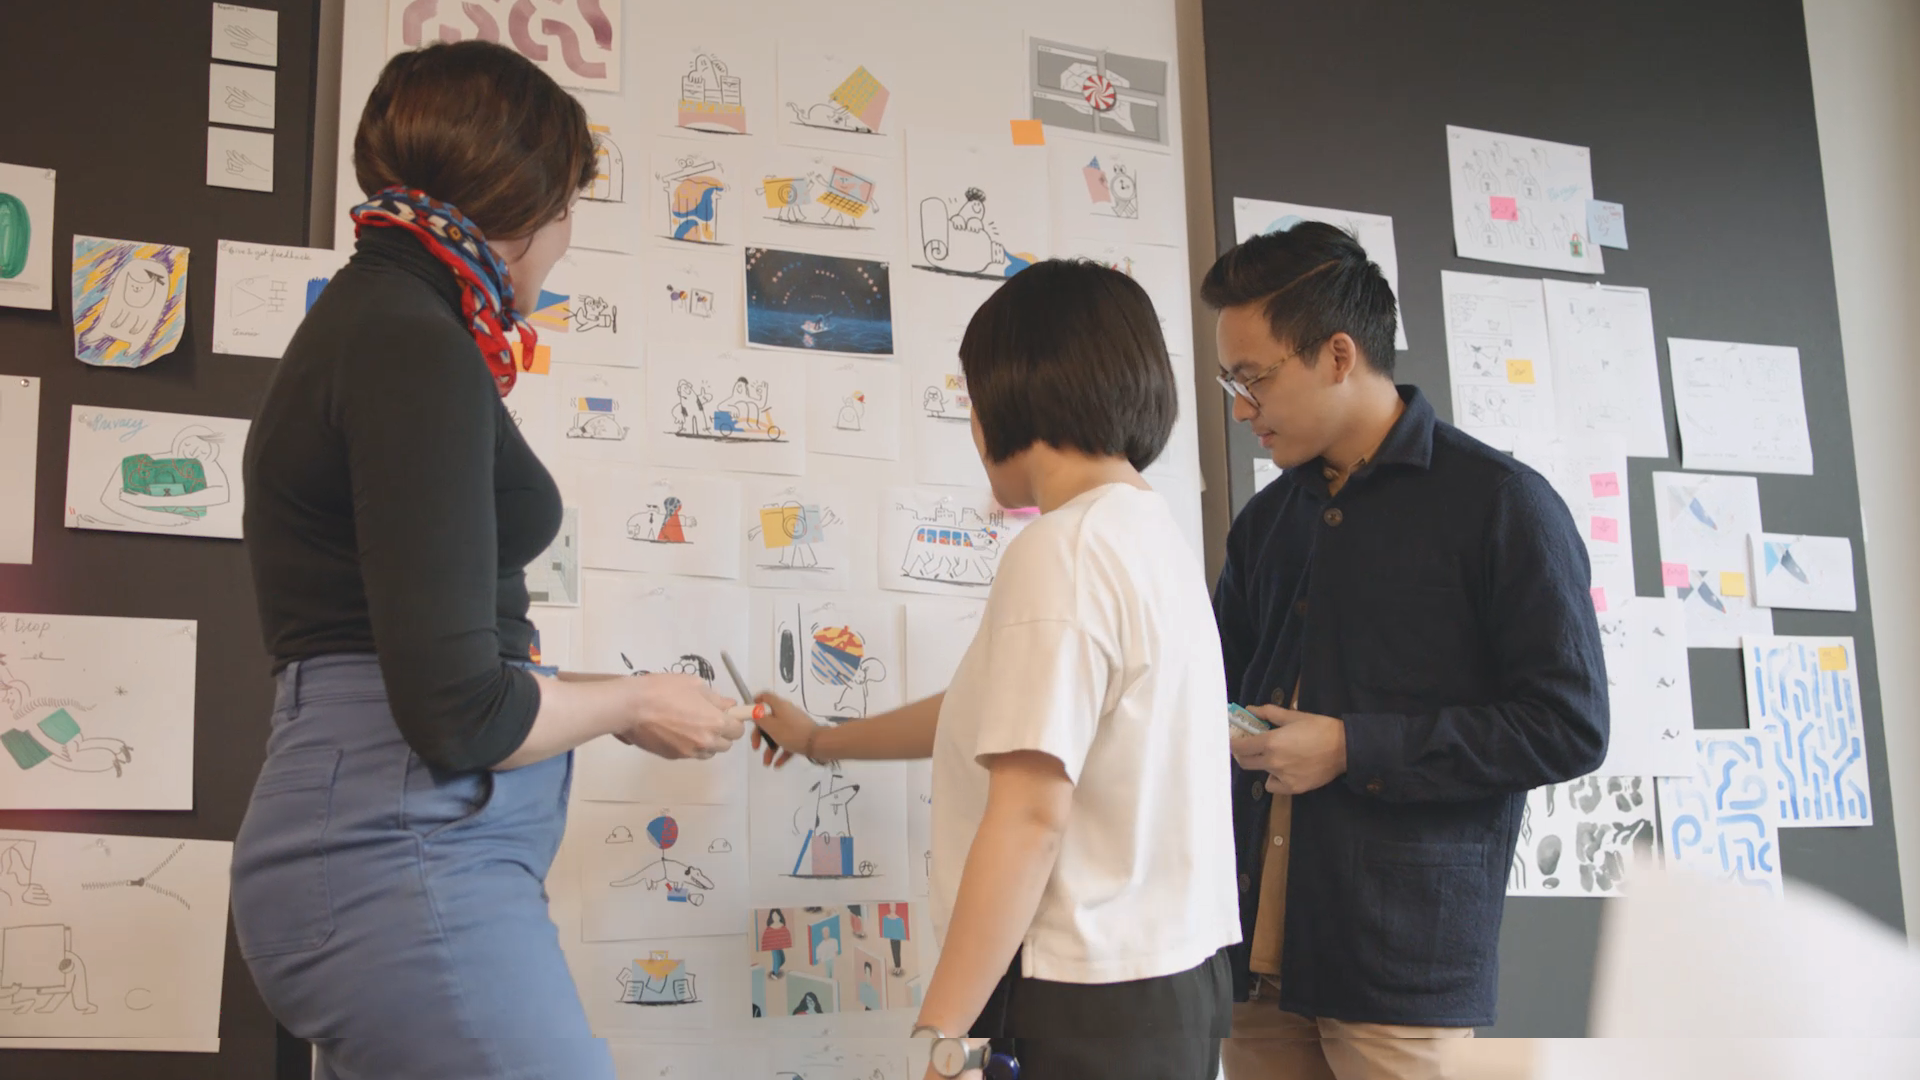 three members of the Dropbox team look at a wall with illustrations posted to it